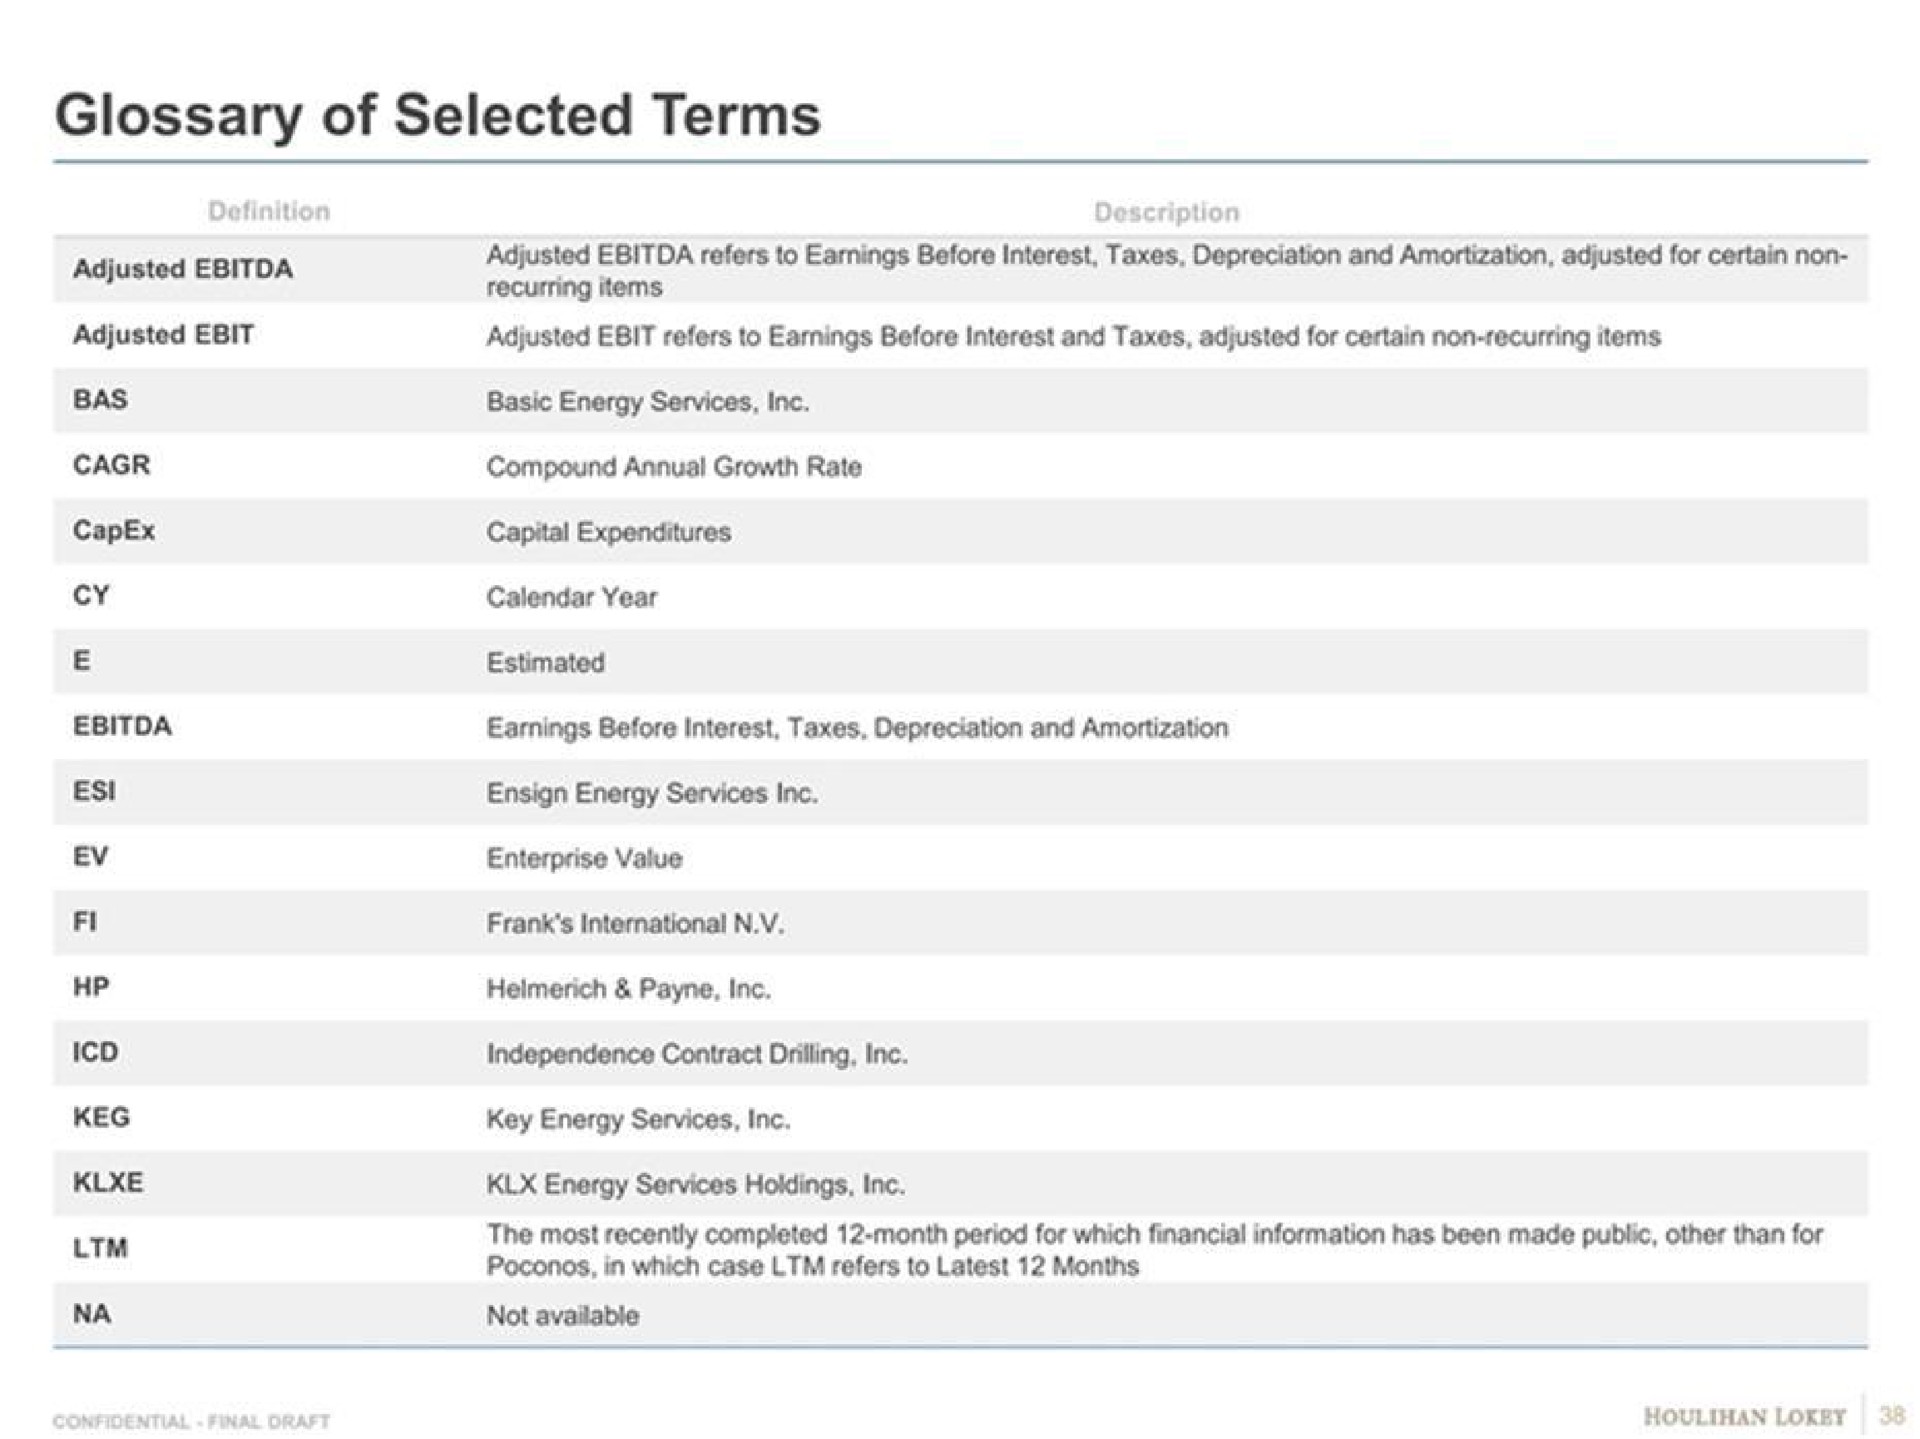 glossary of selected terms energy services holdings | Goldman Sachs